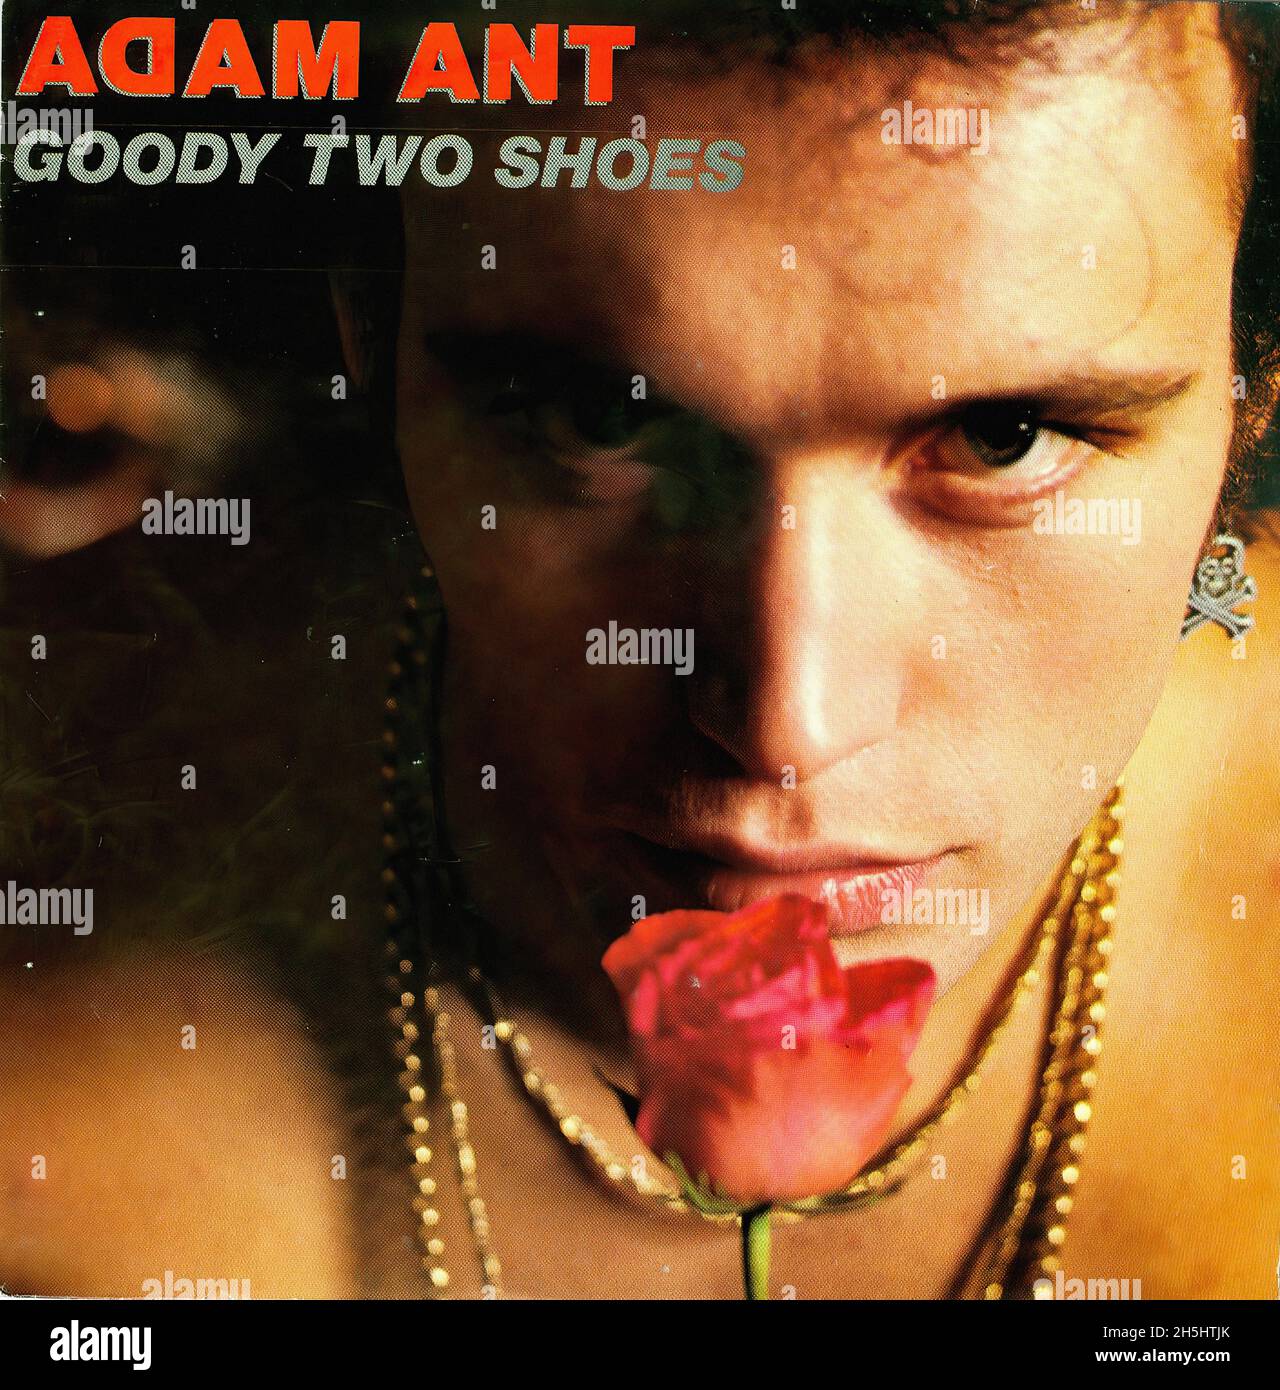 Vintage single record cover - Adam & The Ants - Goodie Two Shoes - D - 1982  Stock Photo - Alamy